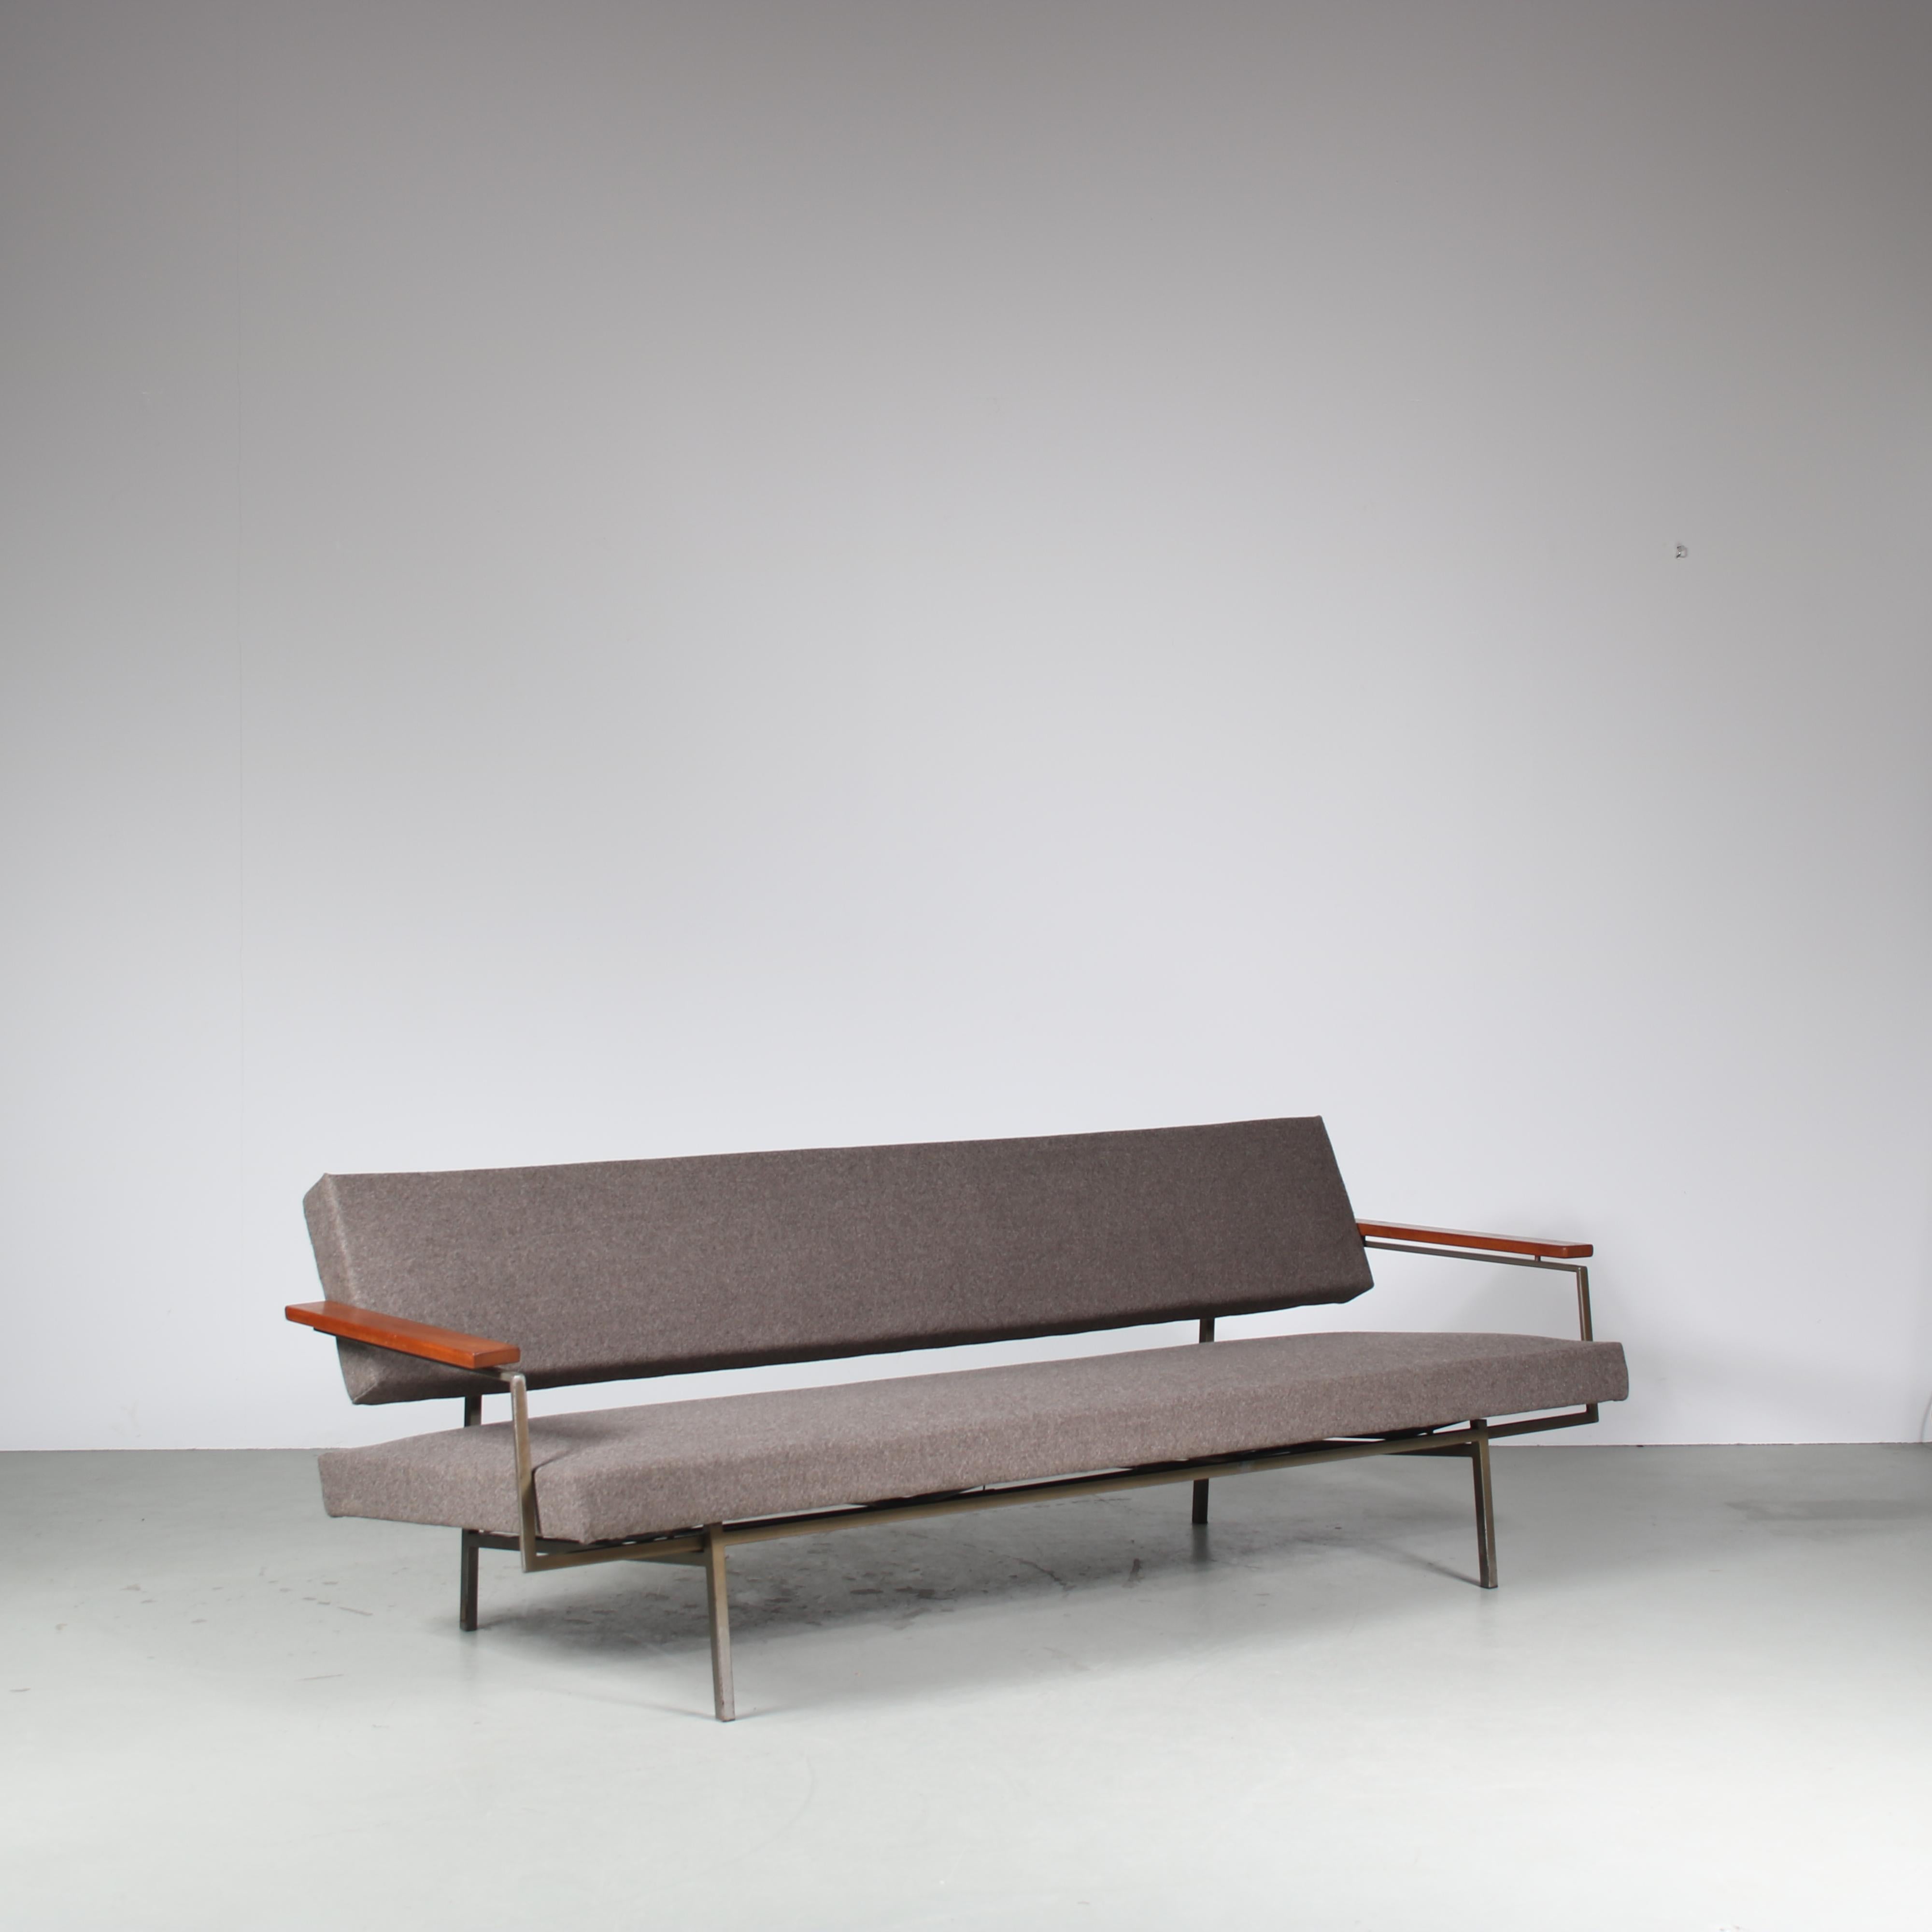 A luxurious sleeping sofa designed by Rob Parry, manufactured by Gelderland in the Netherlands around 1960.

This eye-catching sofa has a beautiful steel base, warm brown wooden armrests and is newly upholstered in high quality grey fabric. This